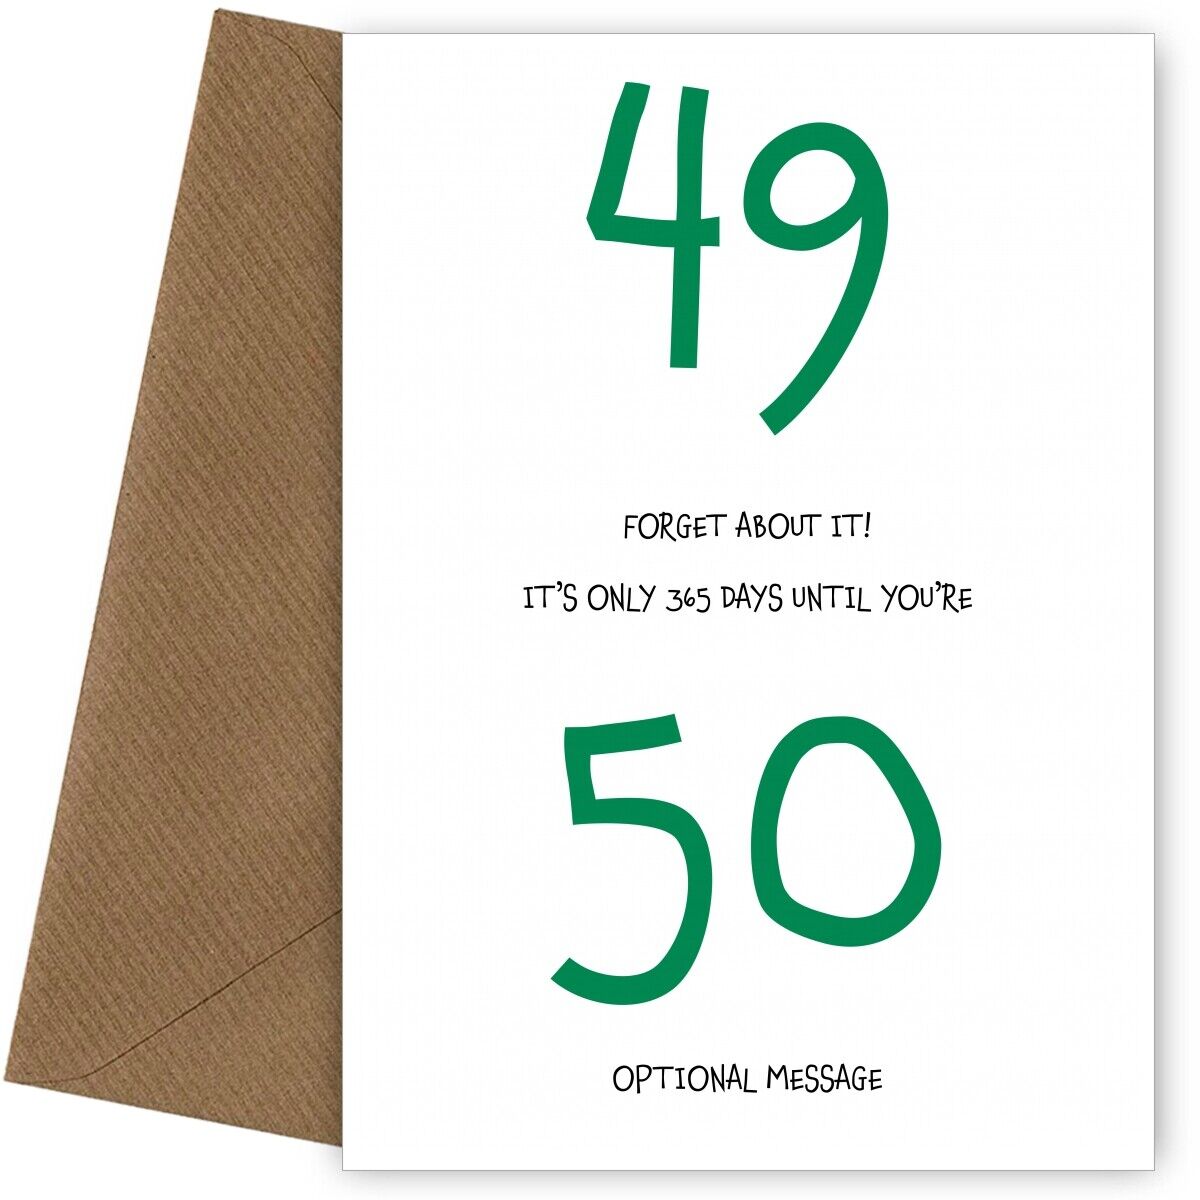 49th Birthday Card for Him / Her - Forget About It - 49 Birthday Card